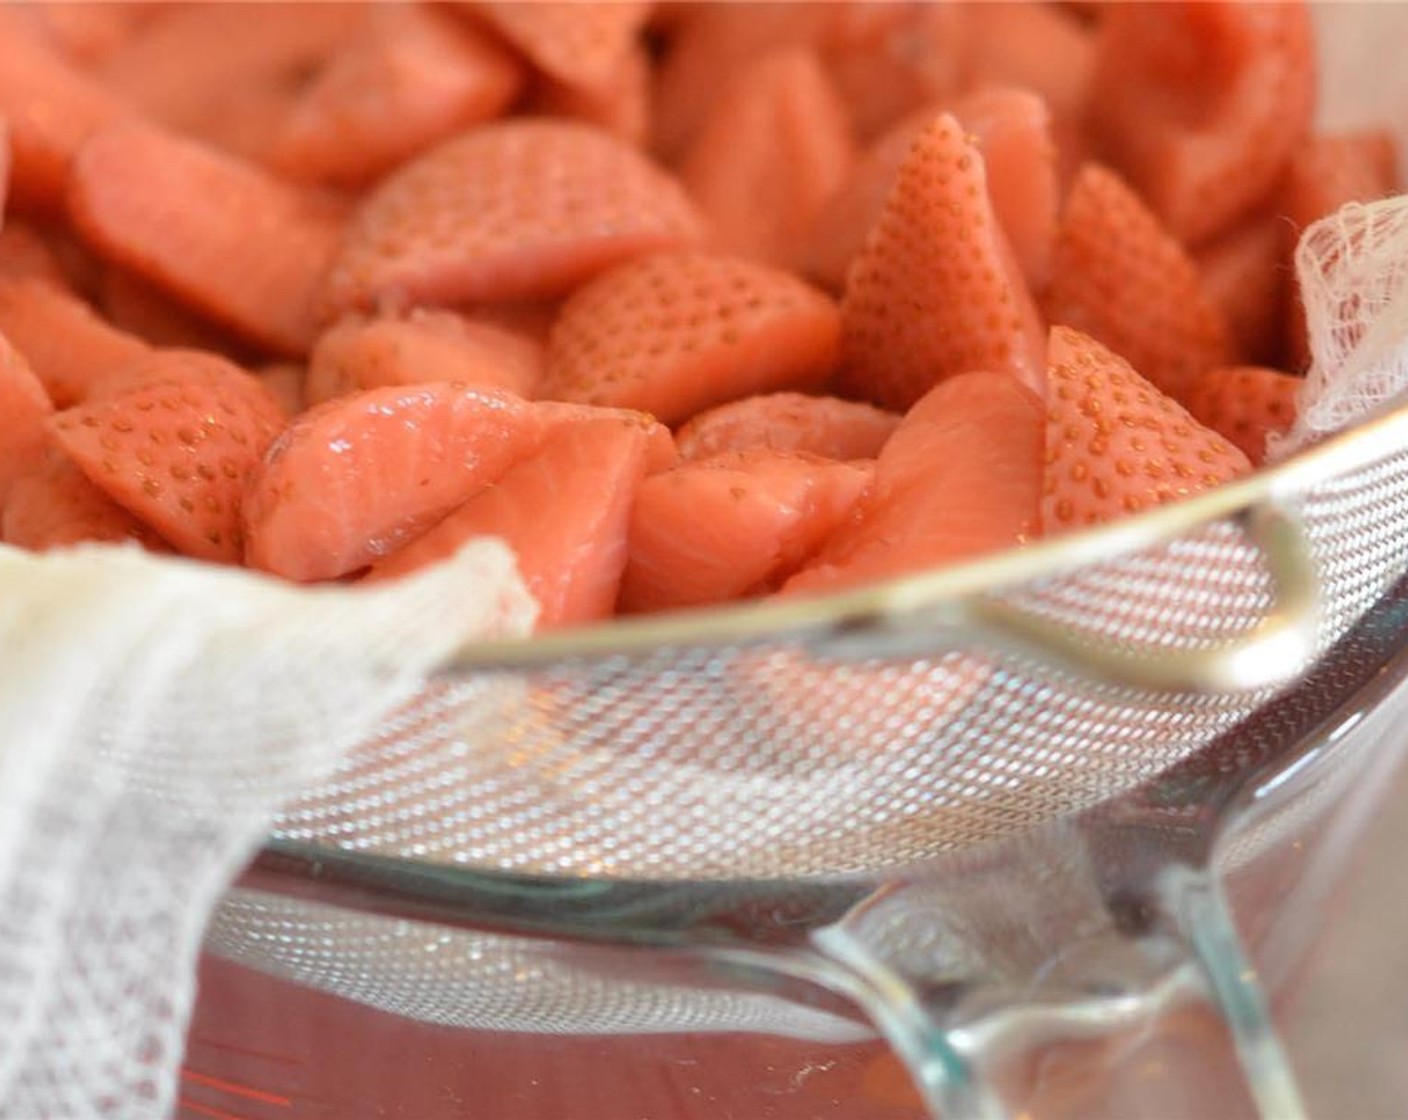 step 5 After three days, line a mesh strainer with cheese cloth and place over a large container that will hold about 3 to 4 cups of liquid. Pour strawberries and vodka into strainer. Let sit and strain for several minutes. Discard strawberries.